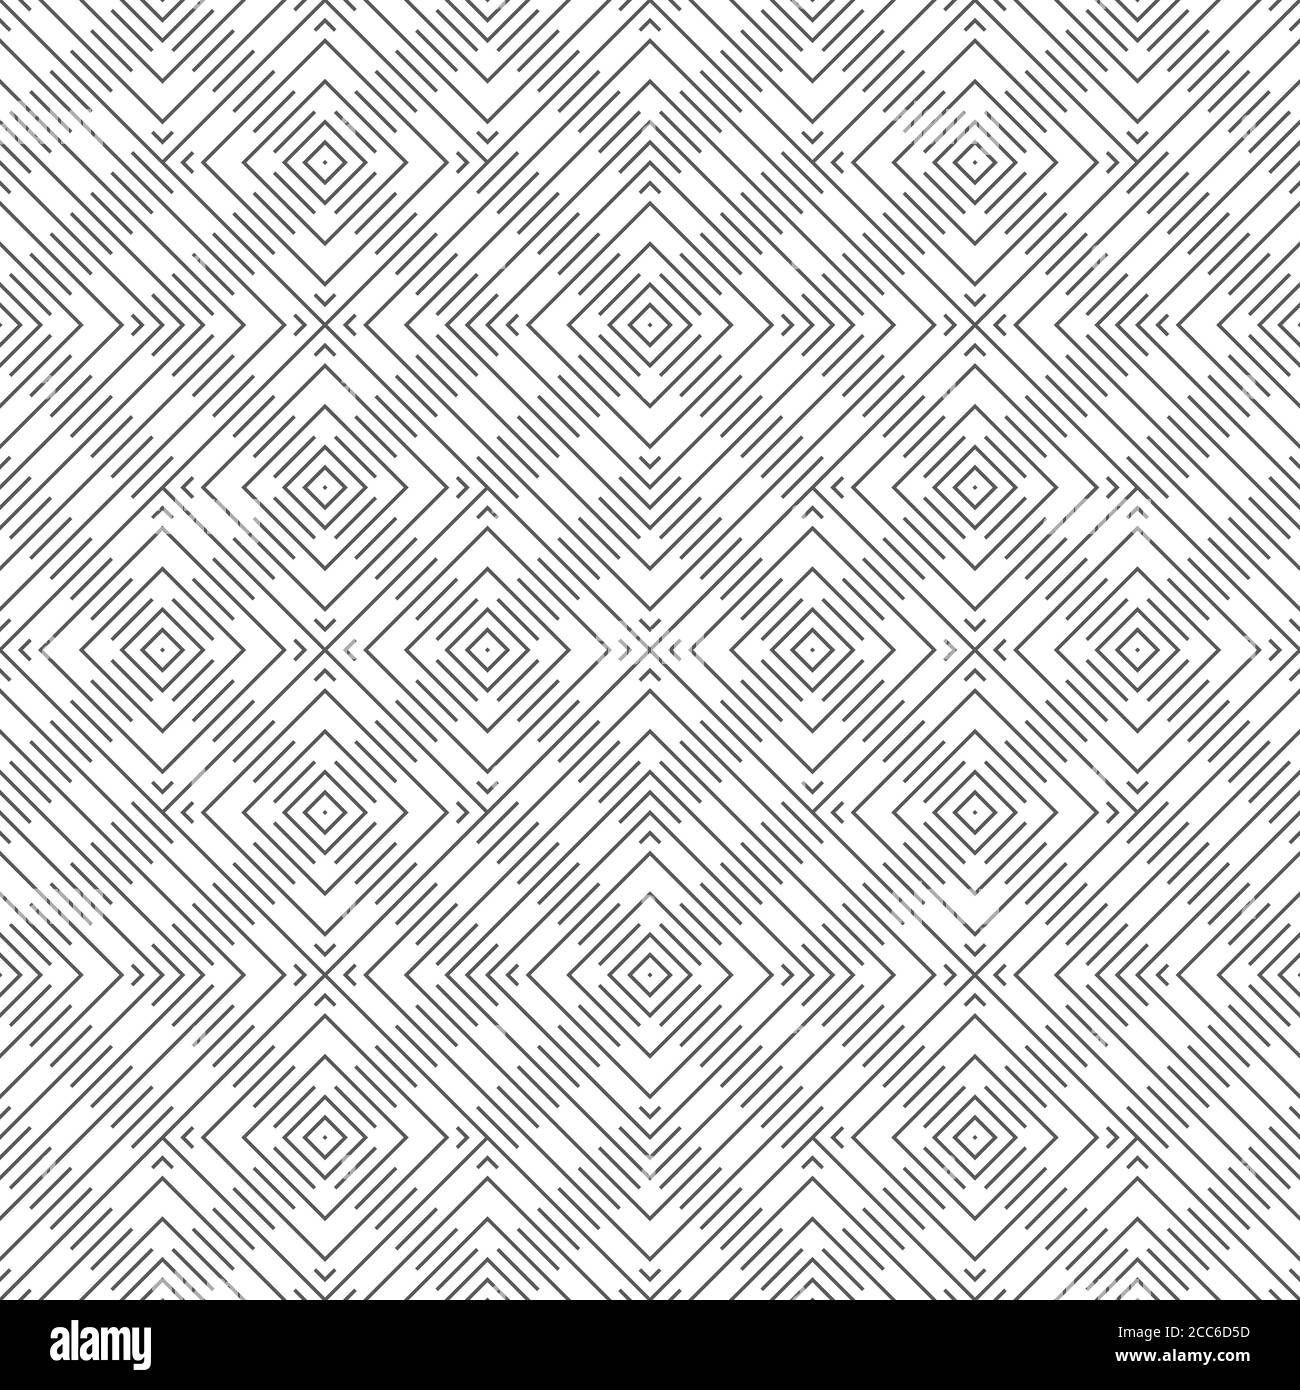 Vector seamless pattern. Abstract textured background. Modern stylish geometric texture with thin lines, which form rhombus, diamond tiles. Stock Vector